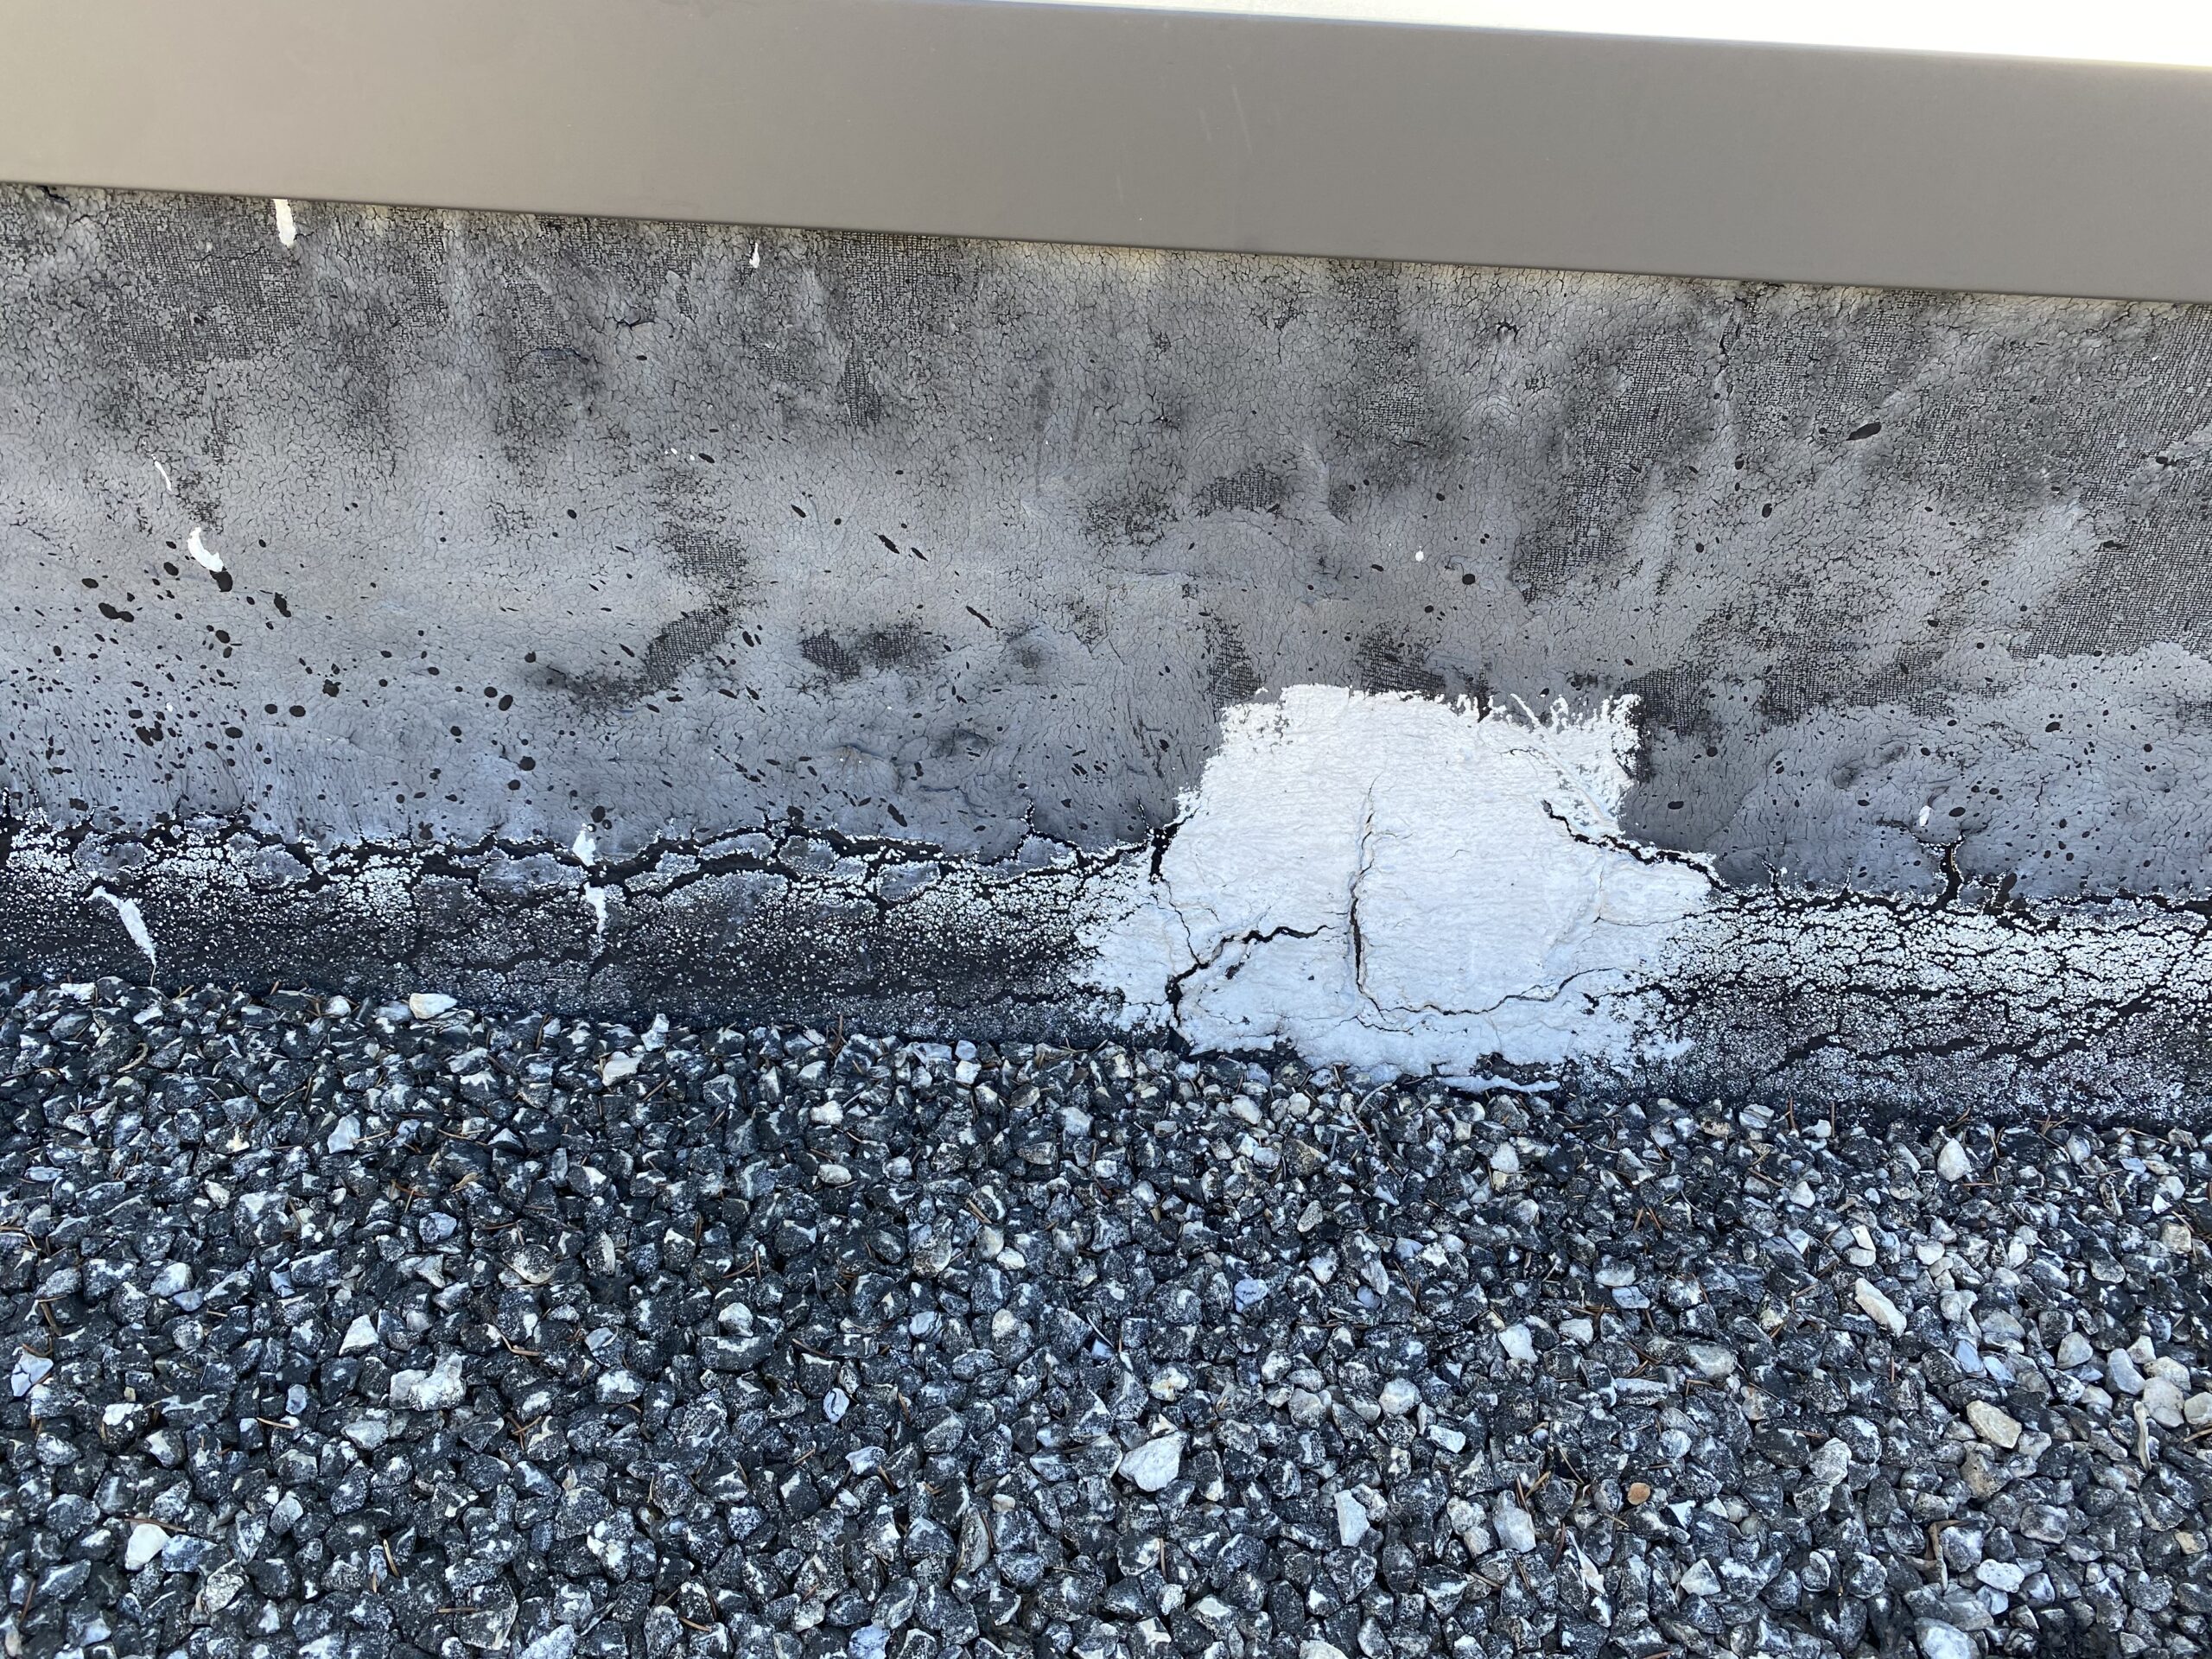 This is a picture of the edge of a wall on a commercial flat roof with damage